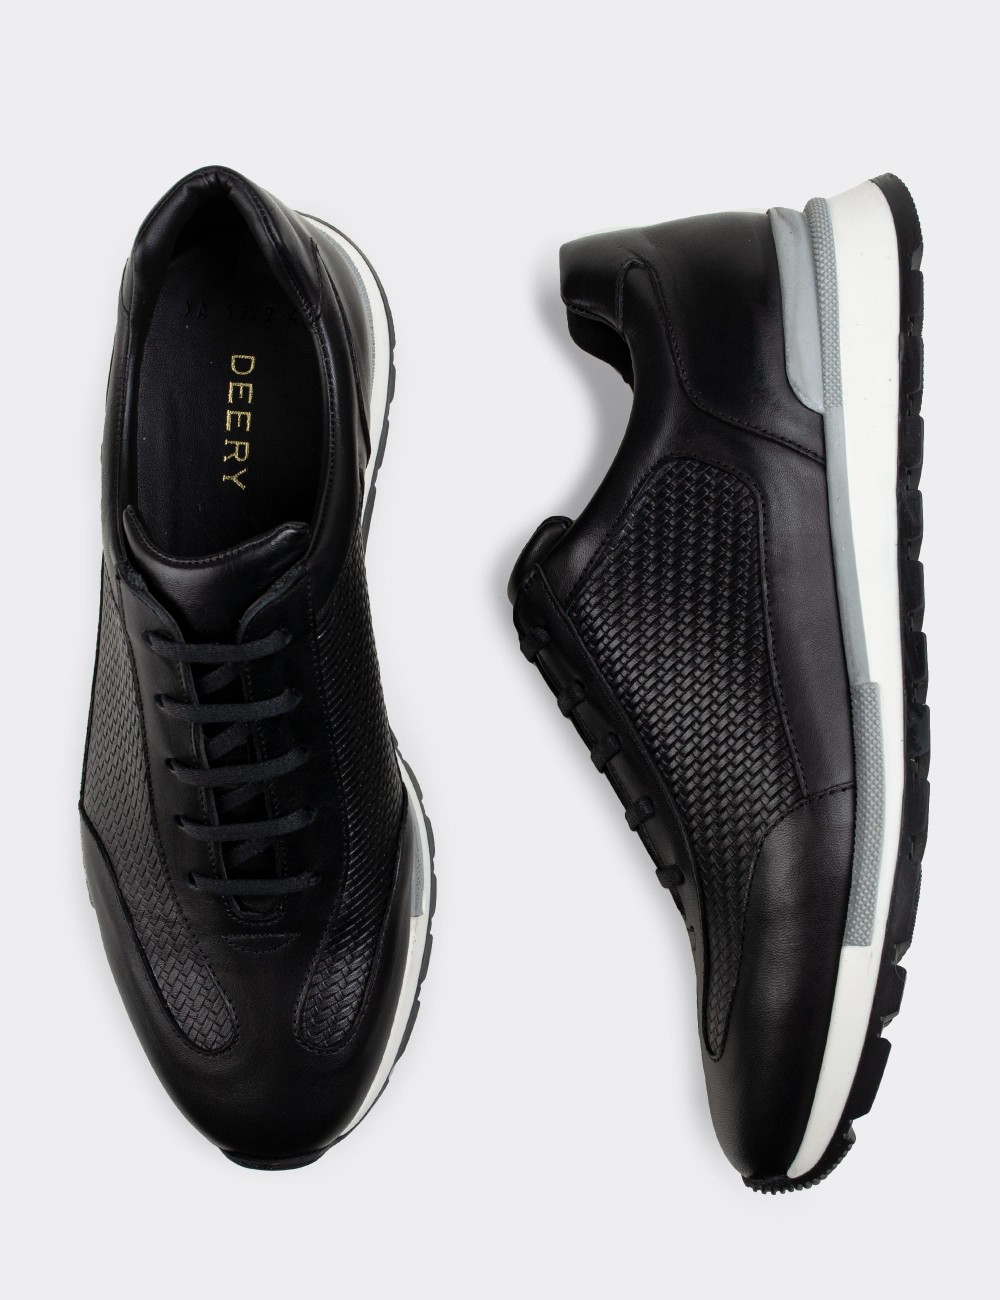 Black  Leather Sneakers - 01729MSYHT02